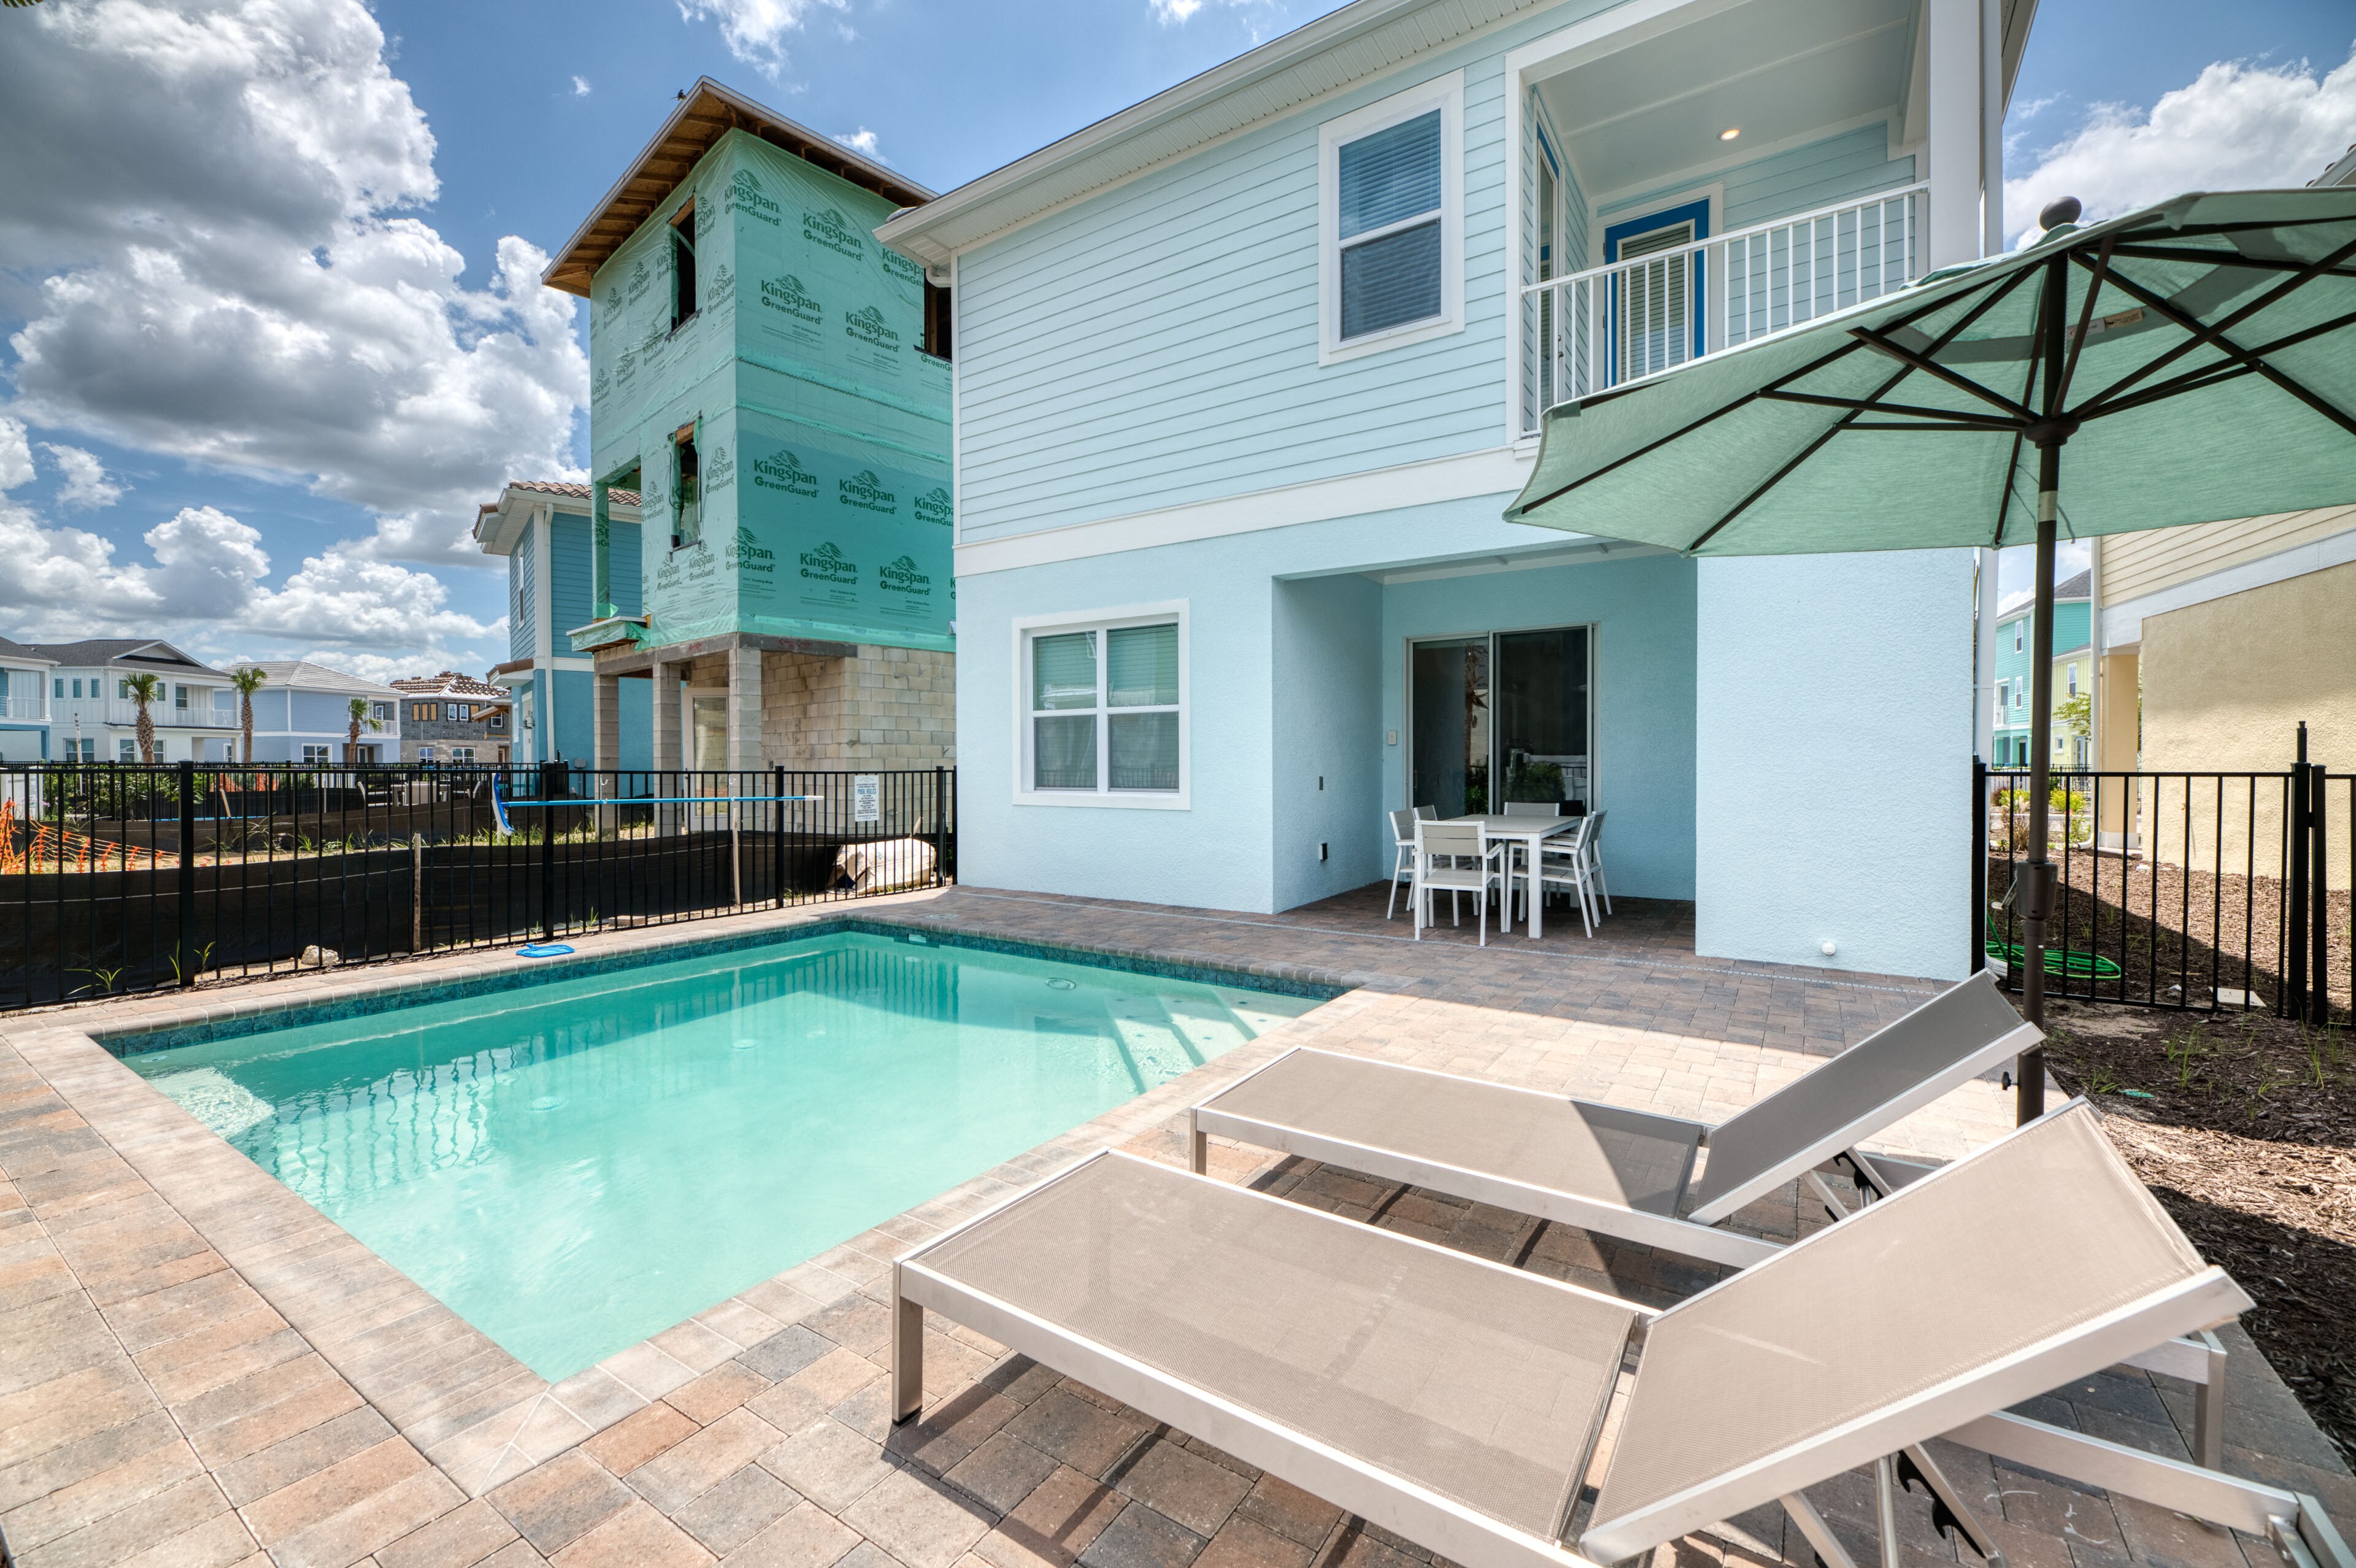 Property Image 1 - Sky Blue Cottage with Private Pool near Disney with Margaritaville Resort Access - 8045KD